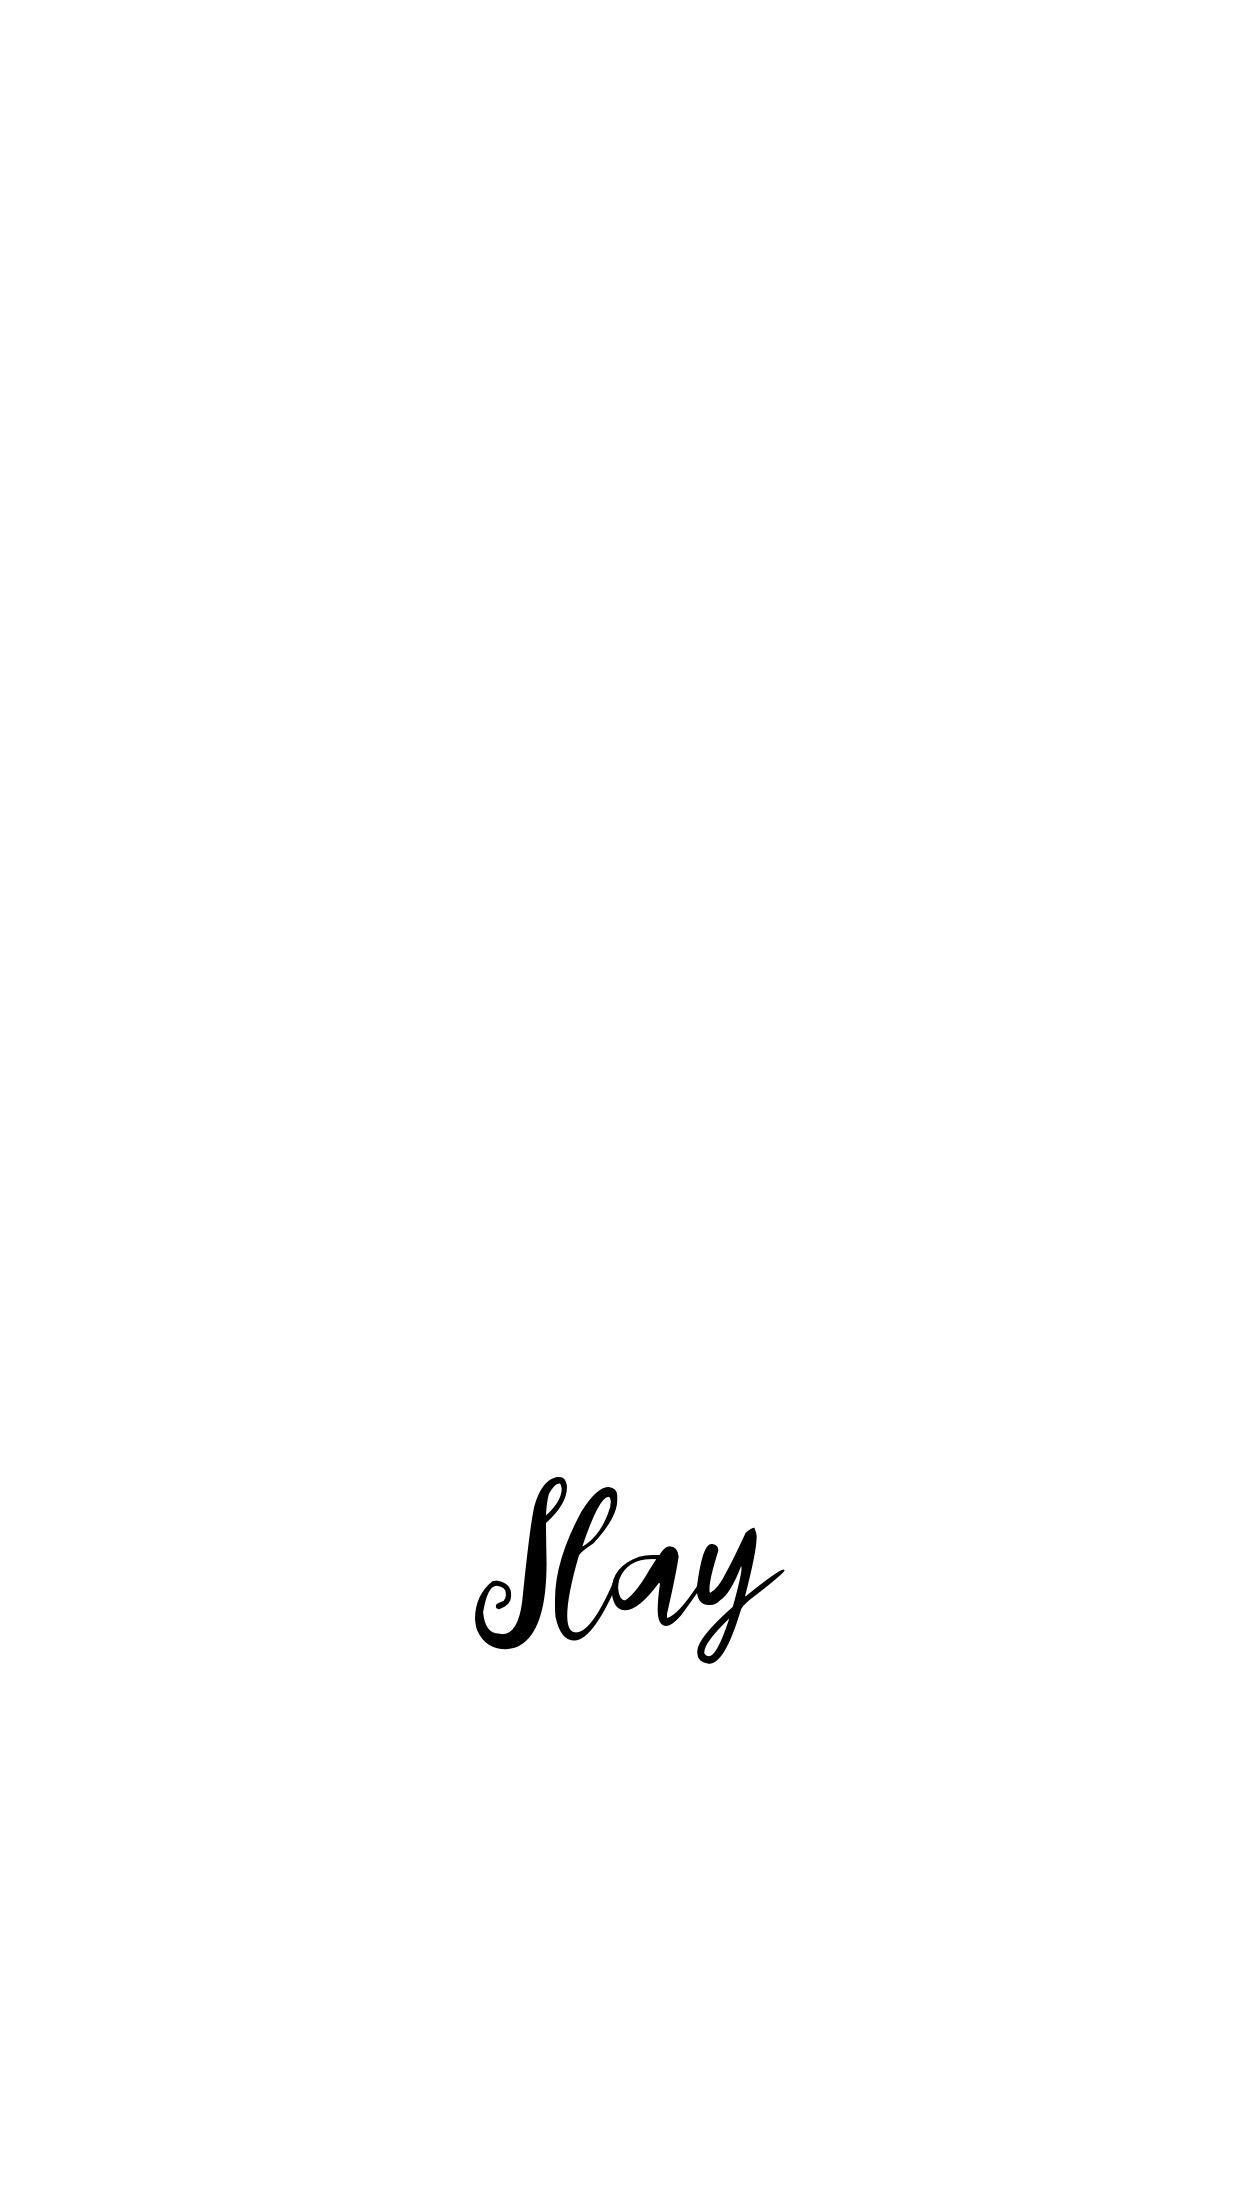 Simple White Aesthetic Wallpaper Top